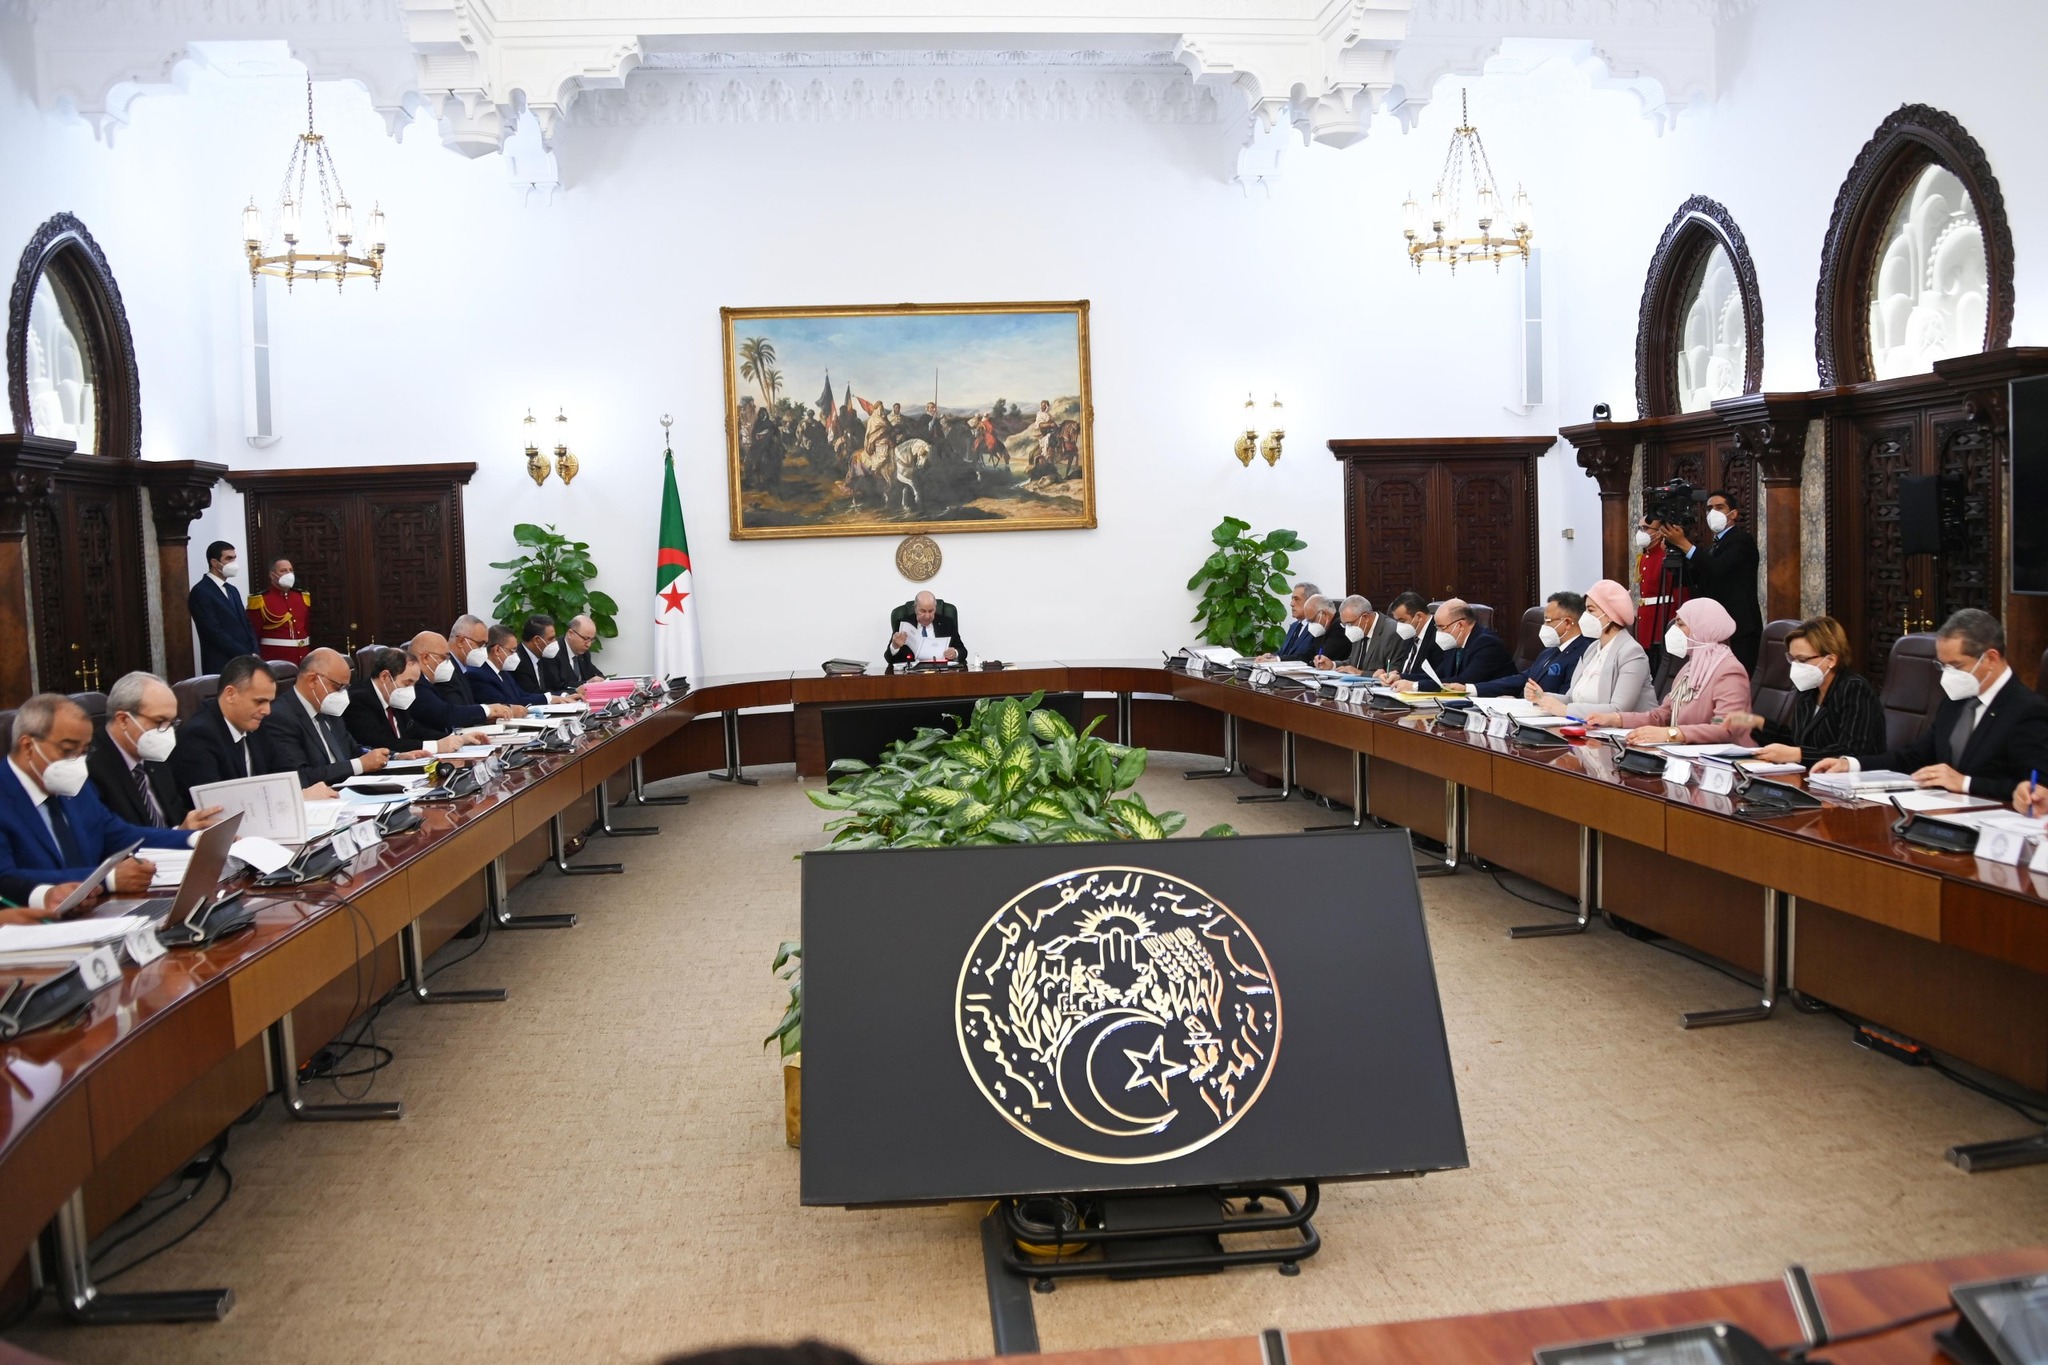 Outcomes of the Council of Ministers meeting - Algerian Dialogue